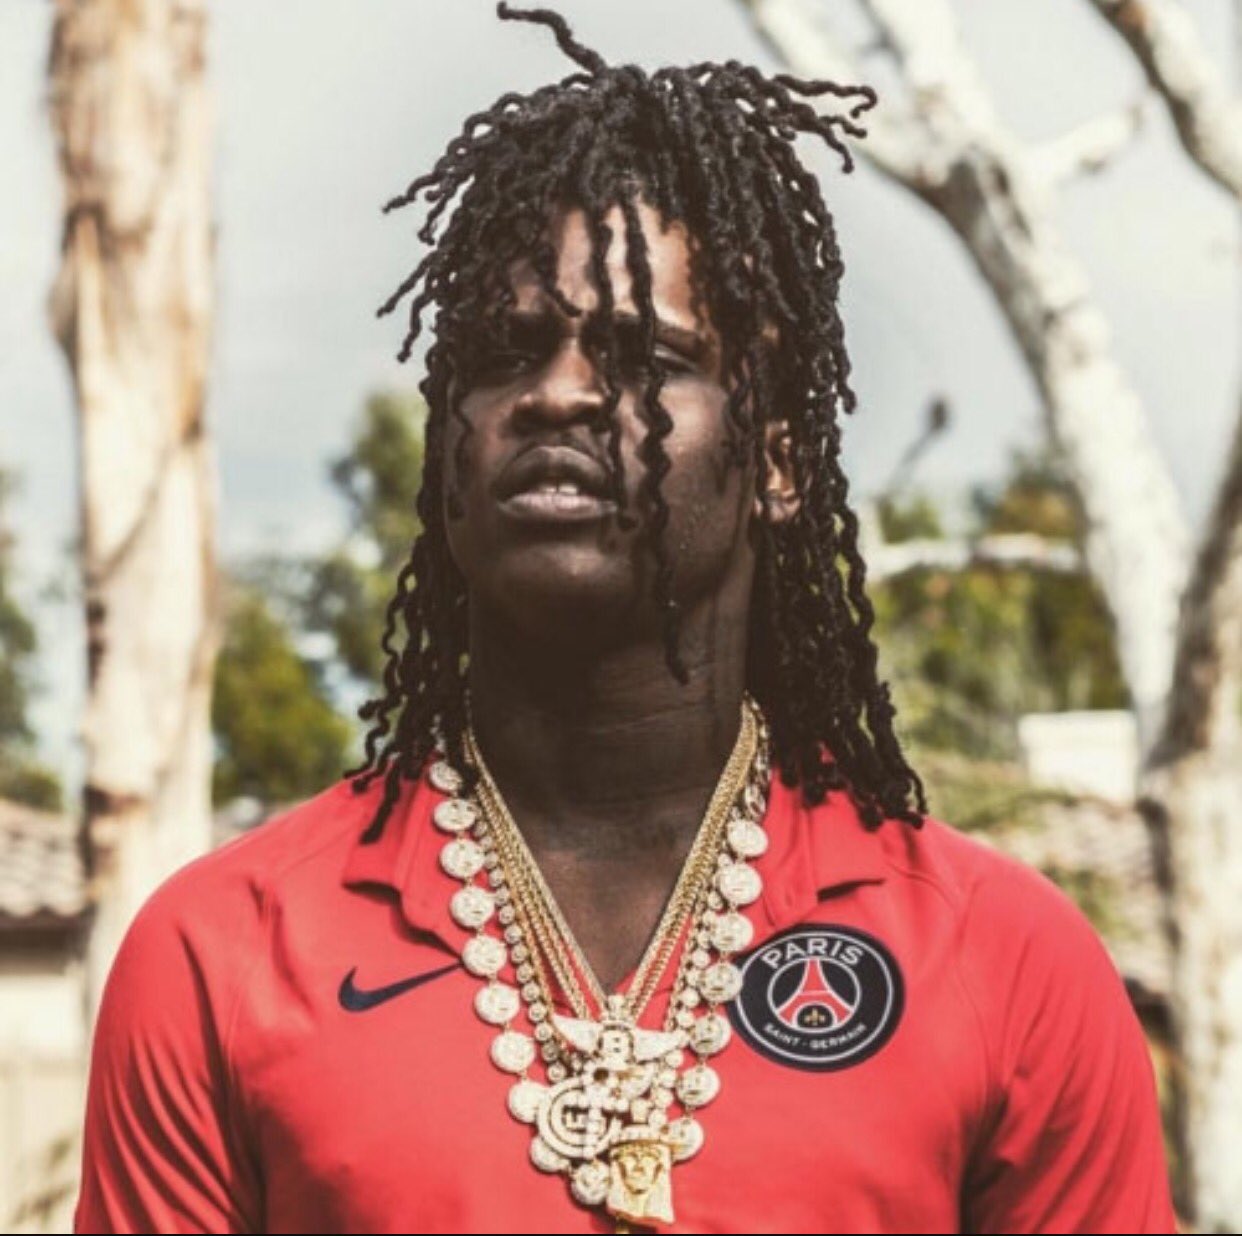 Today is birthday   HAPPY BIRTHDAY CHIEF KEEF   